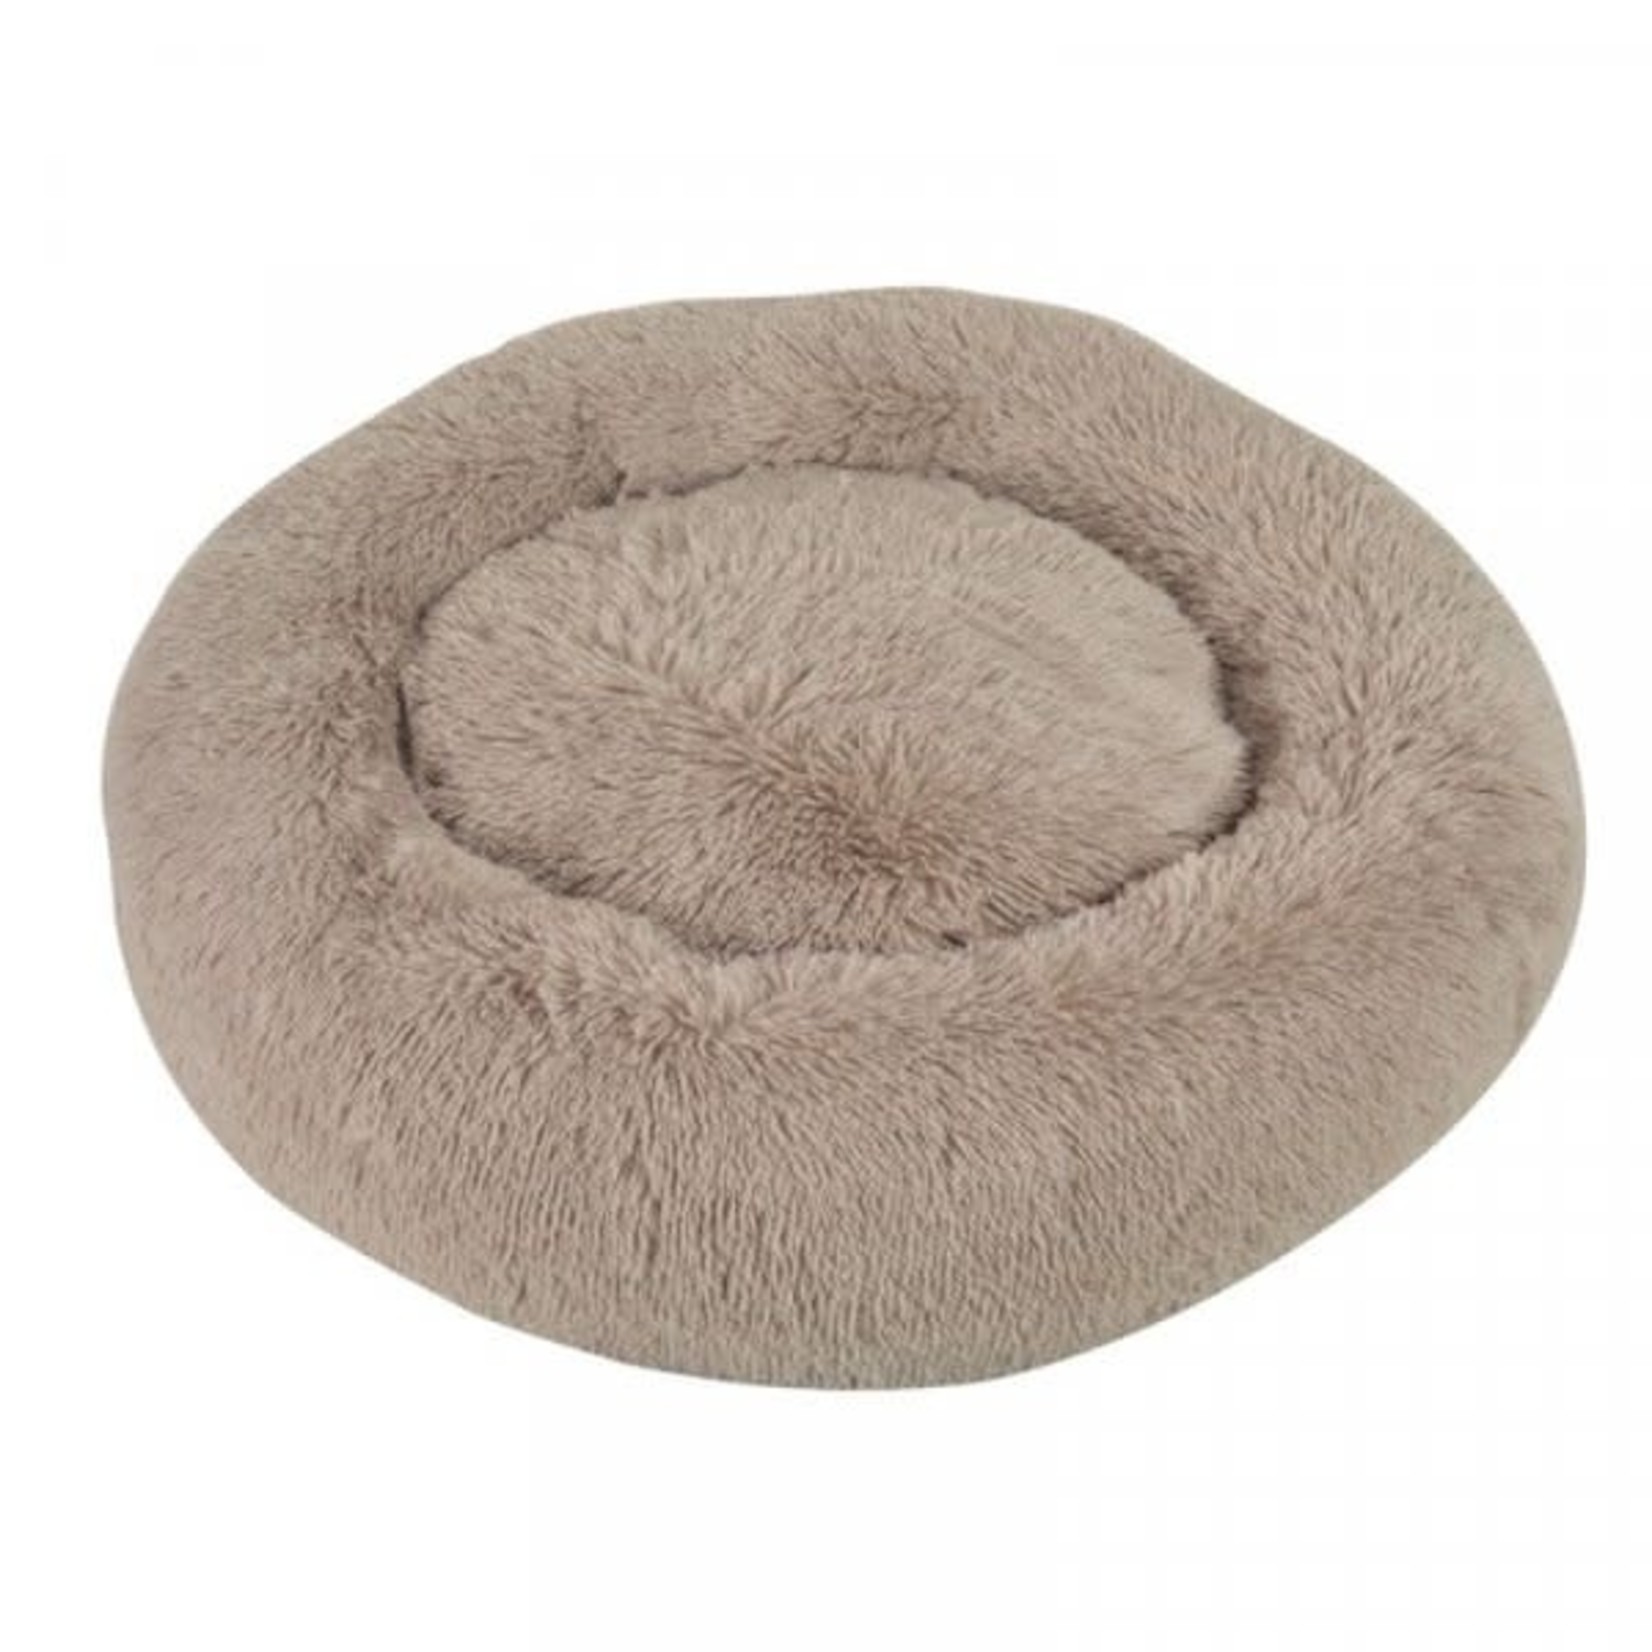 Zöon Posh Pooches Calming Shaggy Faux FurBed Pet Bed, Silver